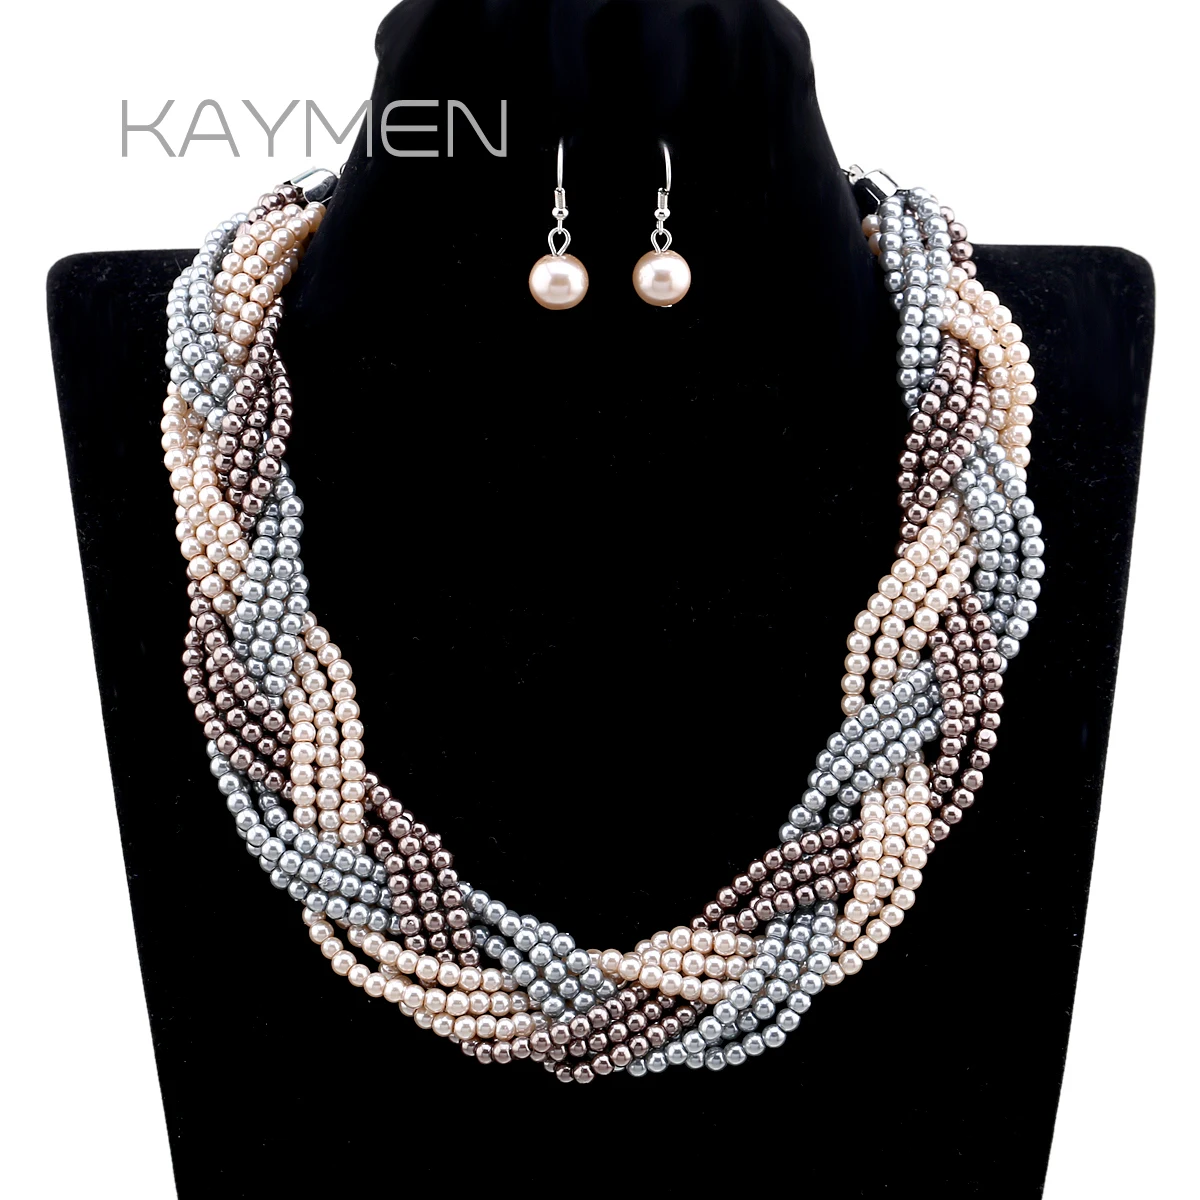 

Newest Exaggerated 9 Pearl Beaded Strands Wrapped Statement Choker Necklace and Earrings Jewelry Sets for Women Girls